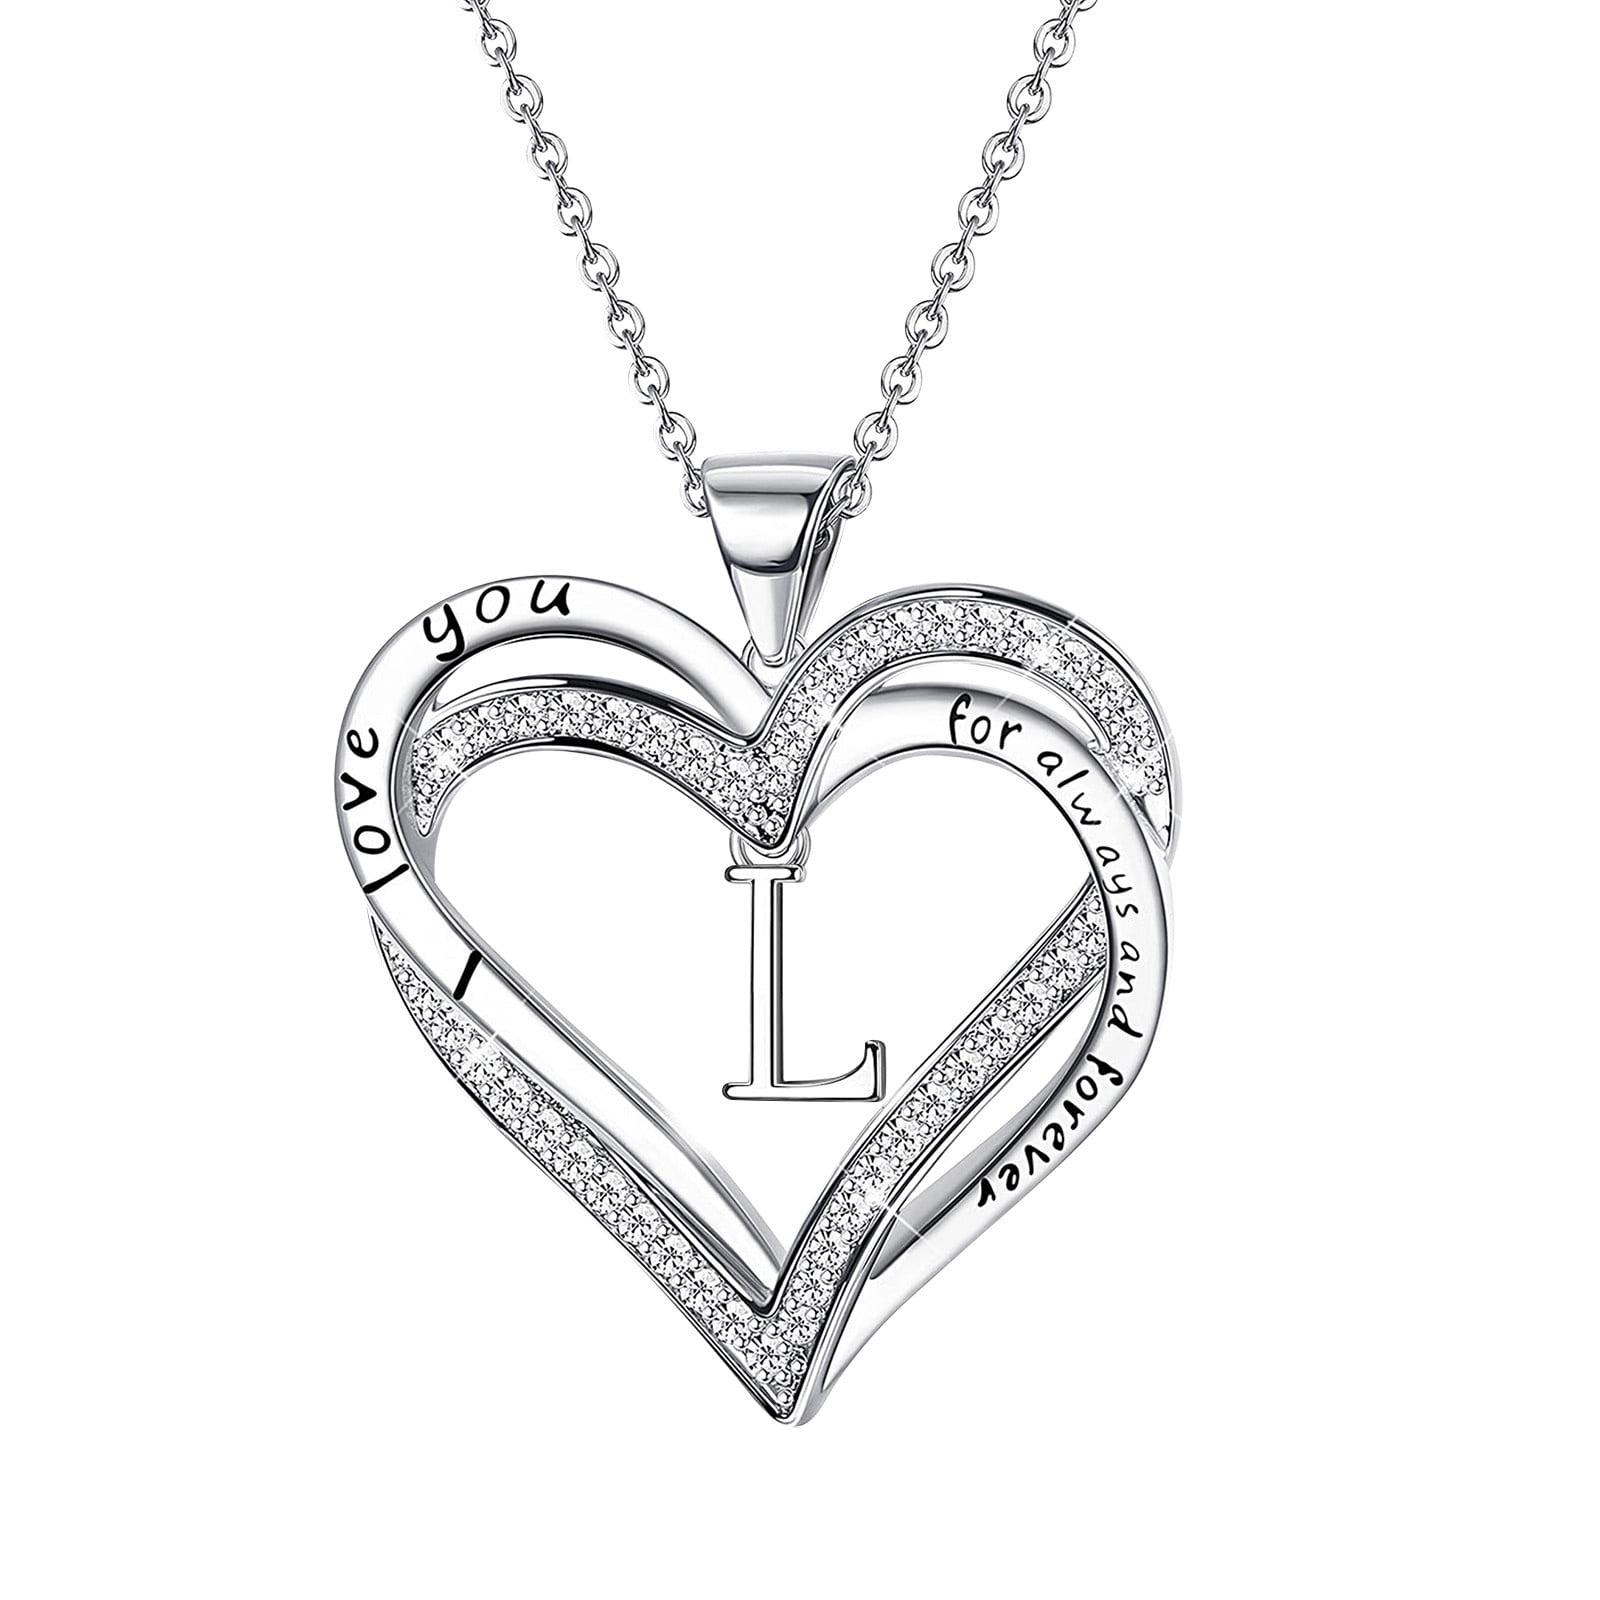 Valentines Day Gift: Heart Pendant Necklace With I Love You Carving Photo  Frames Locket And Heart Locket Necklace For Women From Aplustrade, $0.91 |  DHgate.Com